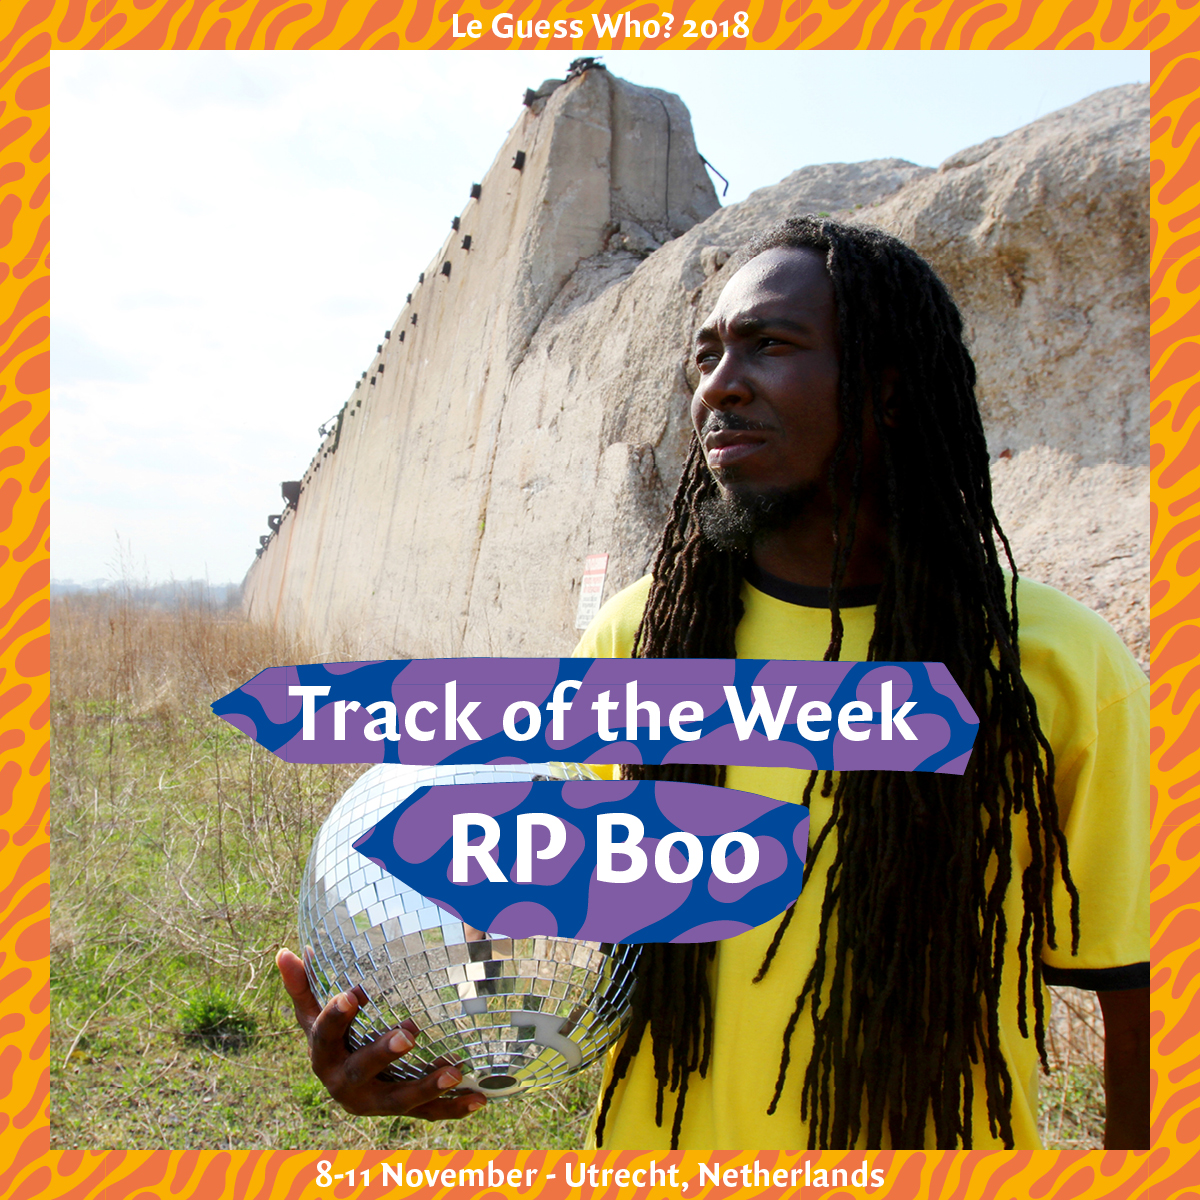  Track of the Week #14: RP Boo - 'Back From The Future'